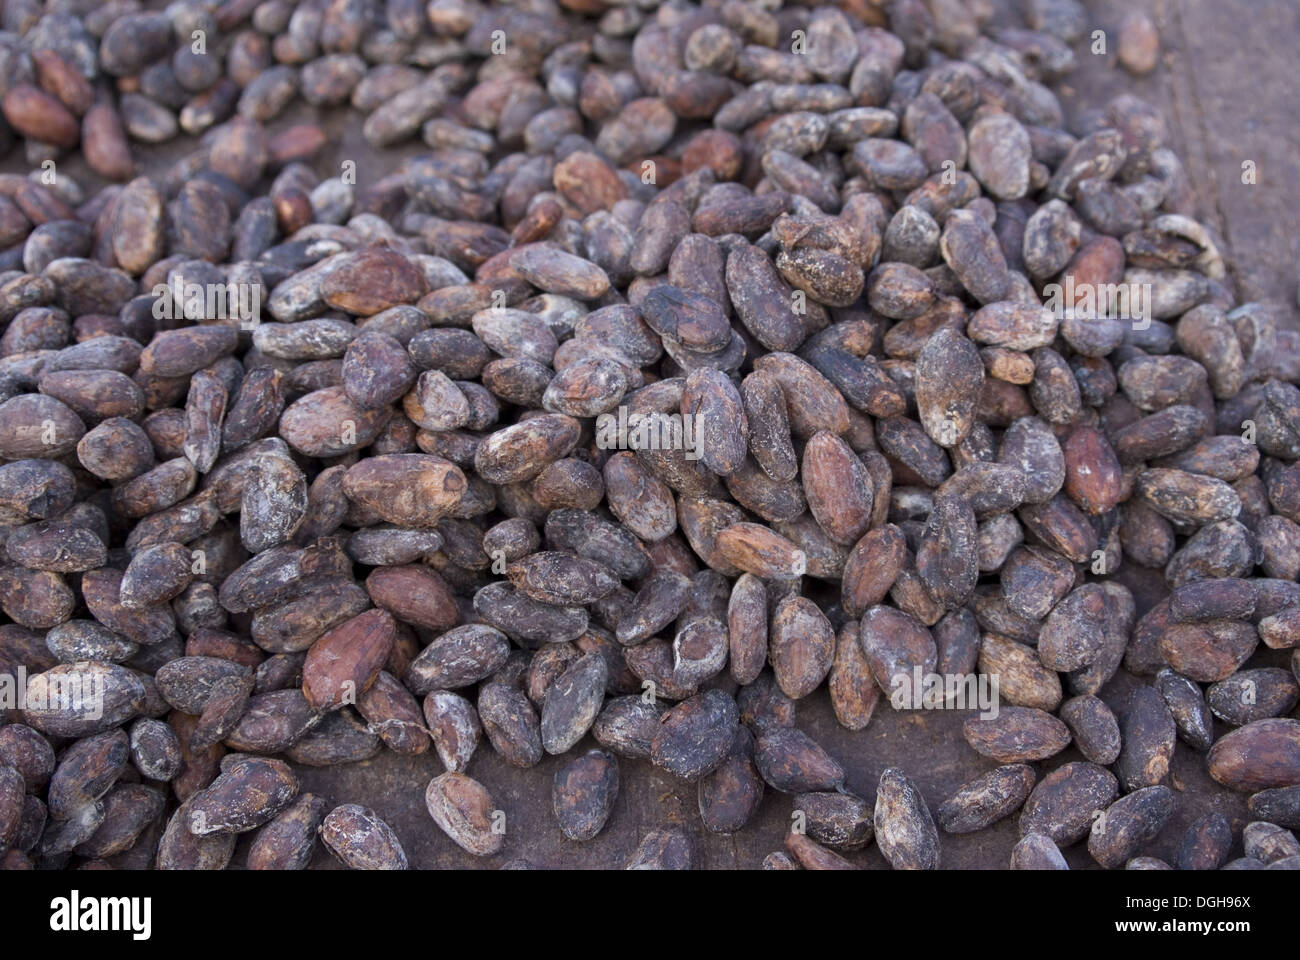 Cocoa (Theobroma cacao) crop close-up of fermented beans drying naturally on plantation Belmont Estate Grenada Grenadines Stock Photo